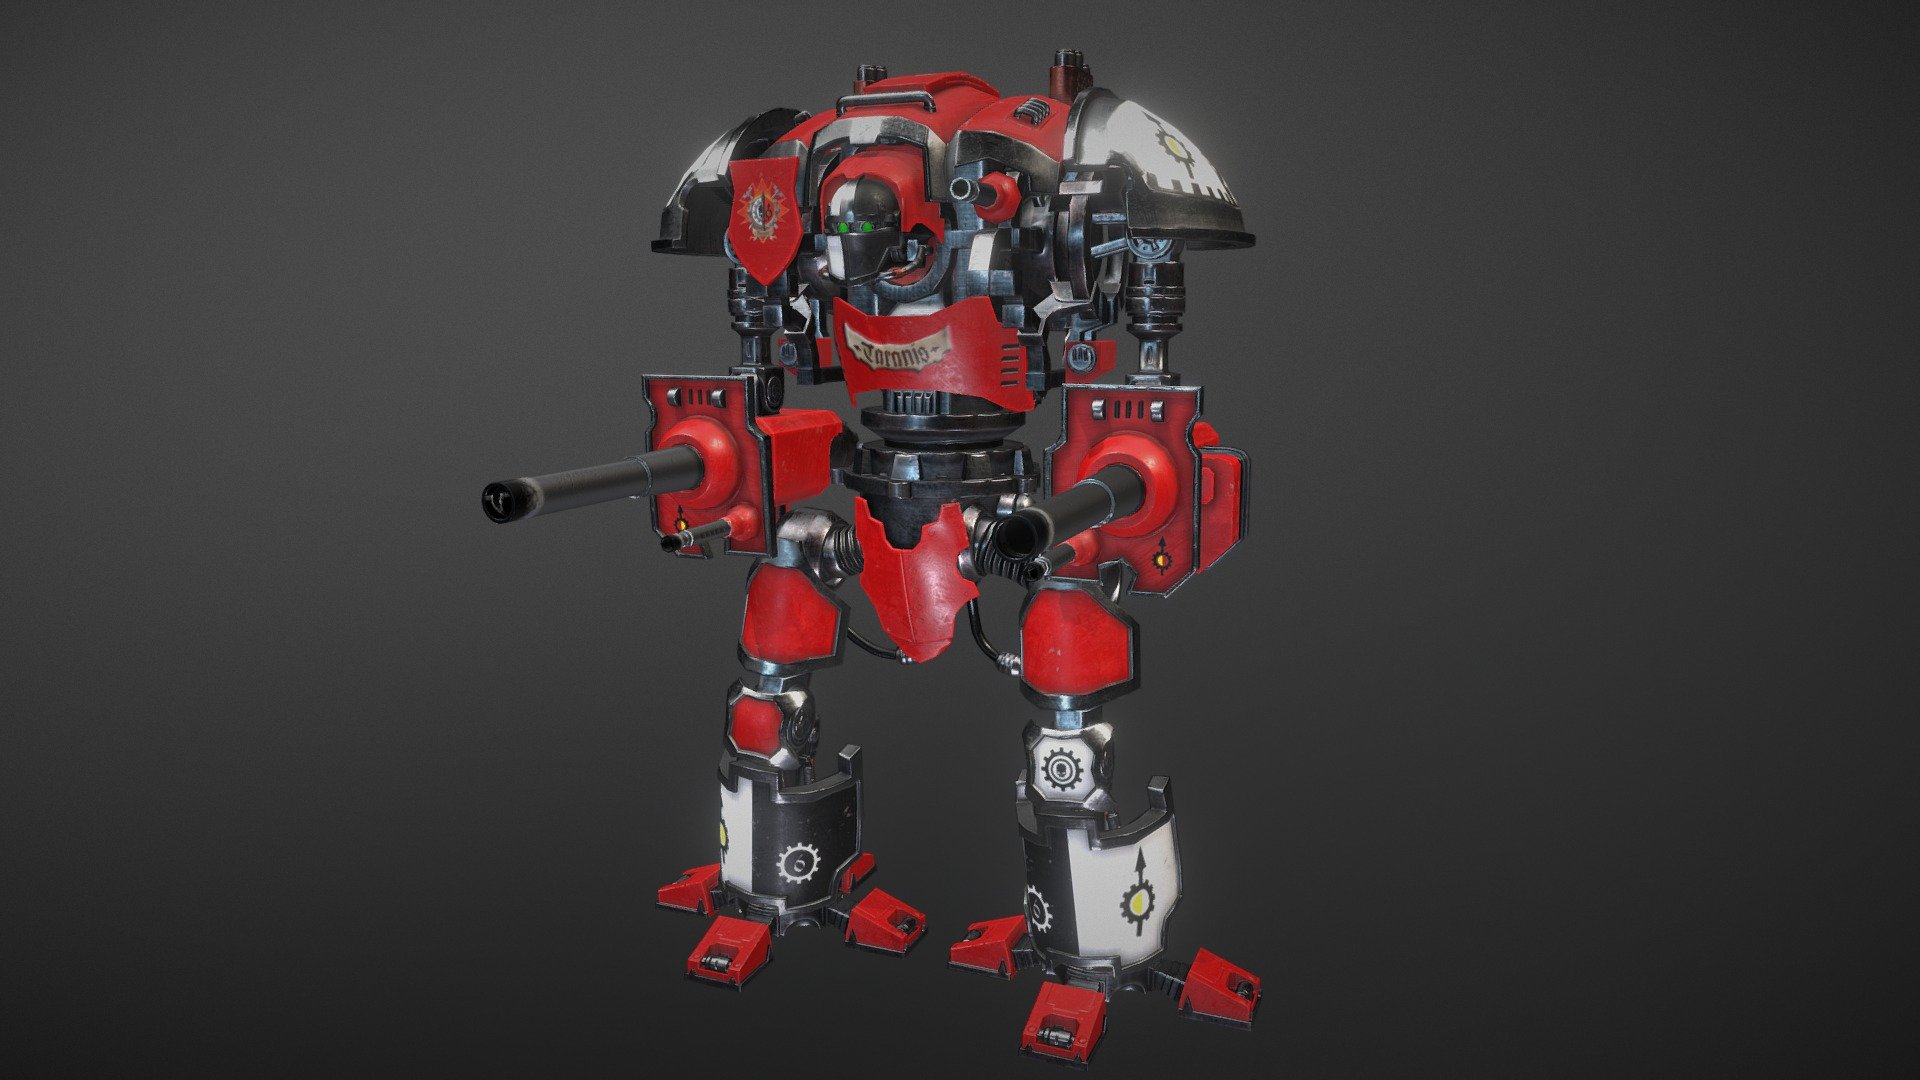 A House Taranis variant of the Imperial Knight I created for my final second year project.

See the House Cadmus variant here: https://sketchfab.com/models/e5db2e221447409e85471ab165ad2b15

Created with Console Specifications in mind; following the required guidelines:




The model must be created within a 40,000 triangle limit (+/- 500 tris)

The model must be textured at 4096x4096

The model must be textured using a PBR workflow

Textured in Substance Painter 2 and Adobe Photoshop

Final Tri Count: 40,445 - Imperial Knight - House Taranis - 3D model by Daniel Saunders (@danielsaunders) 3d model